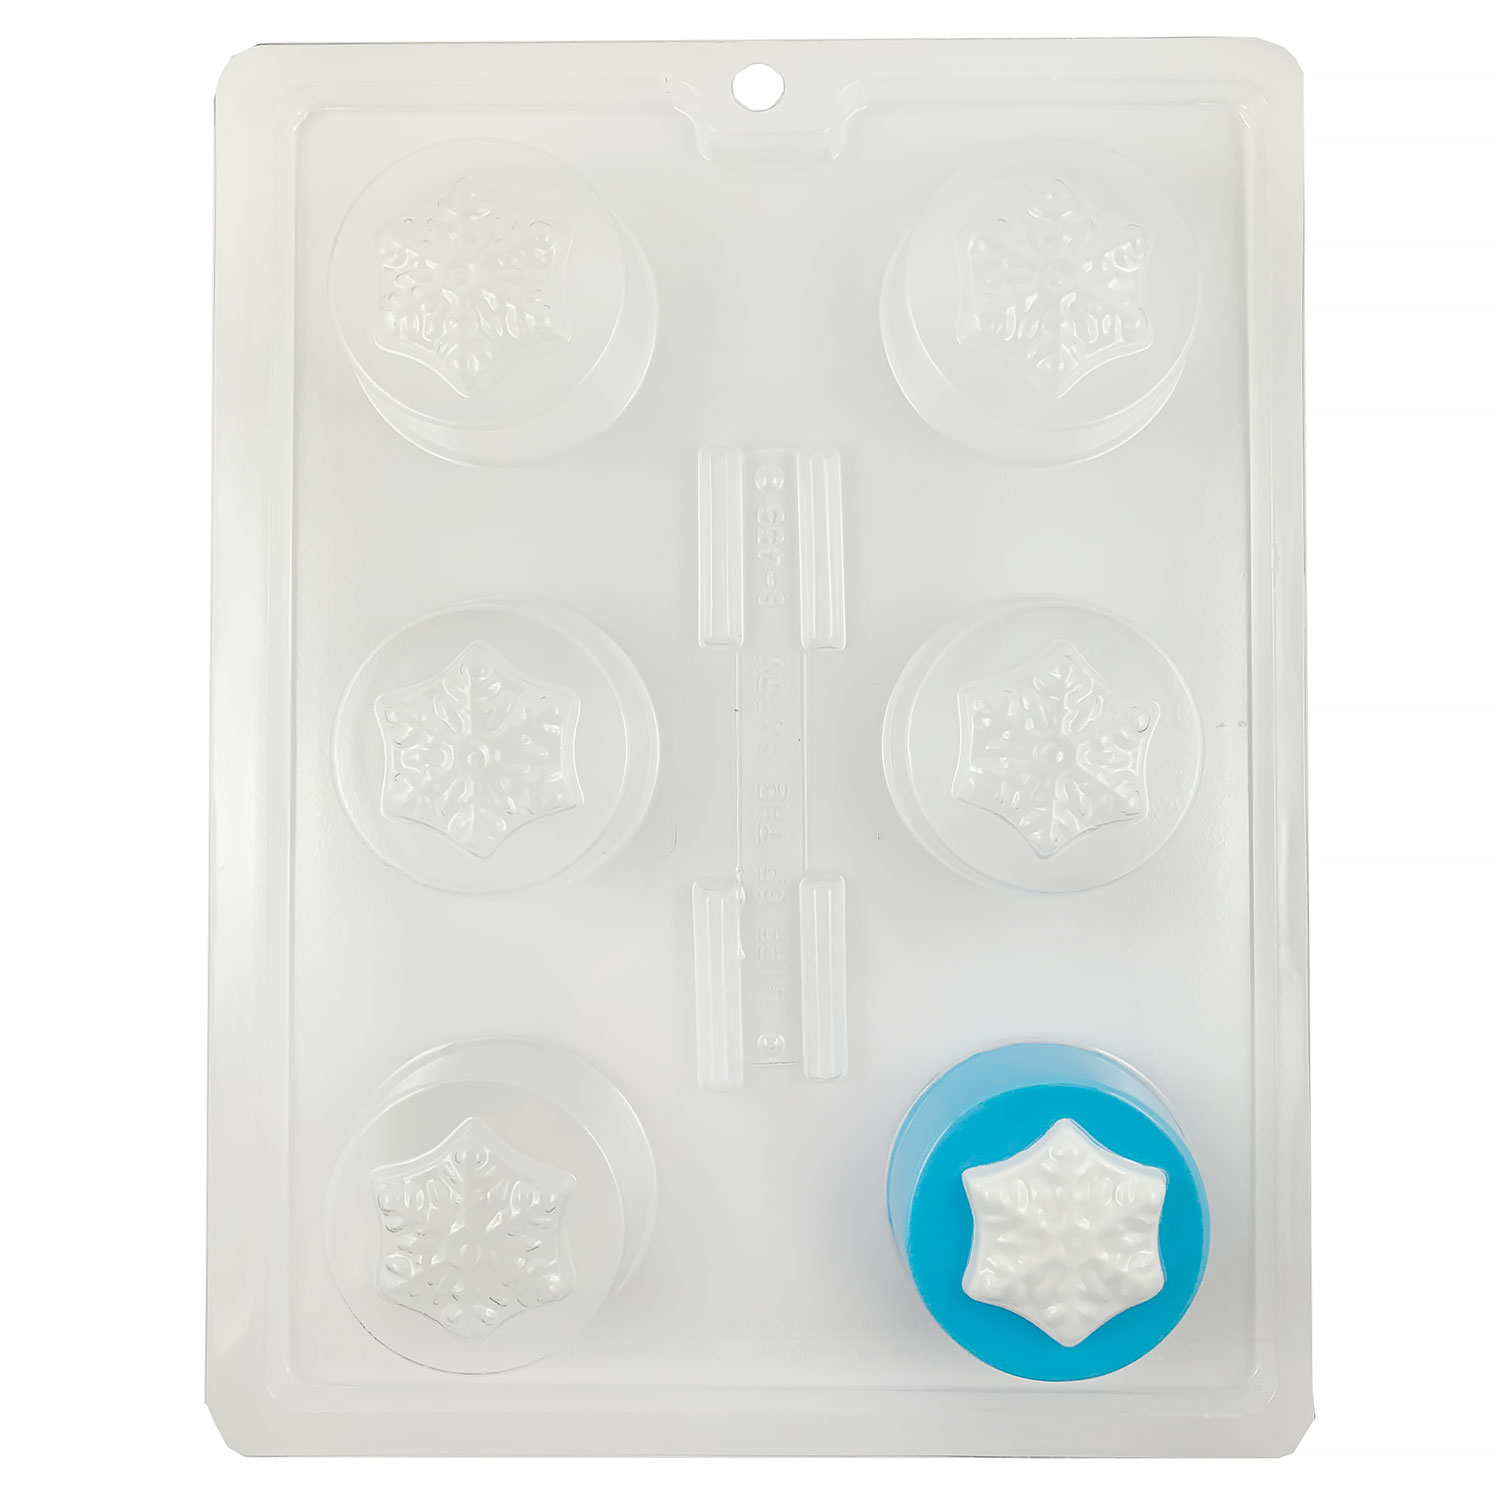 Snowflake Chocolate Covered Oreo Mold - Country Kitchen SweetArt